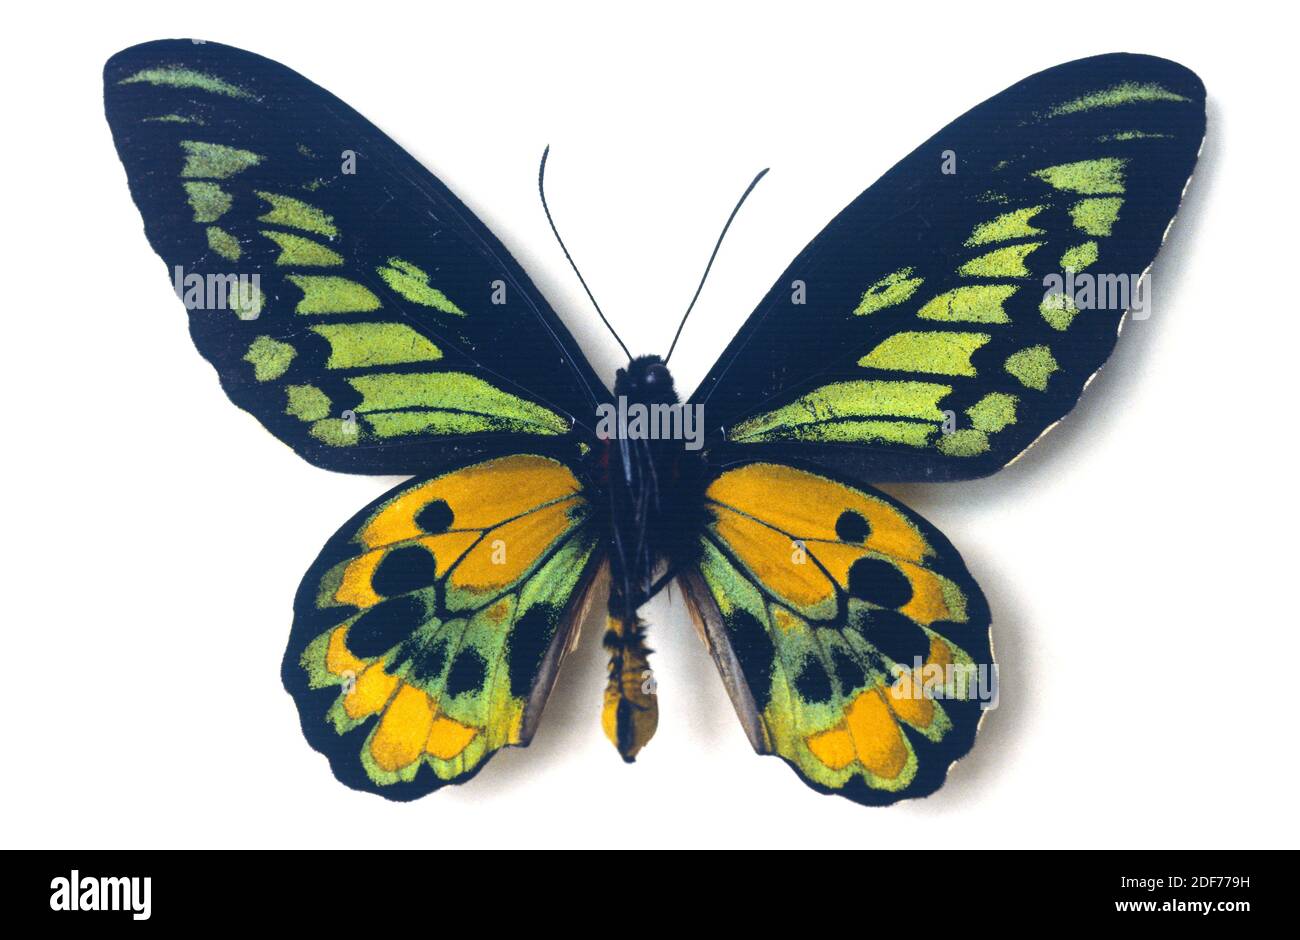 Rothschild's birdwing (Ornithoptera rothschildi) is a butterfly native to New Guinea. Male, ventral side. Stock Photo